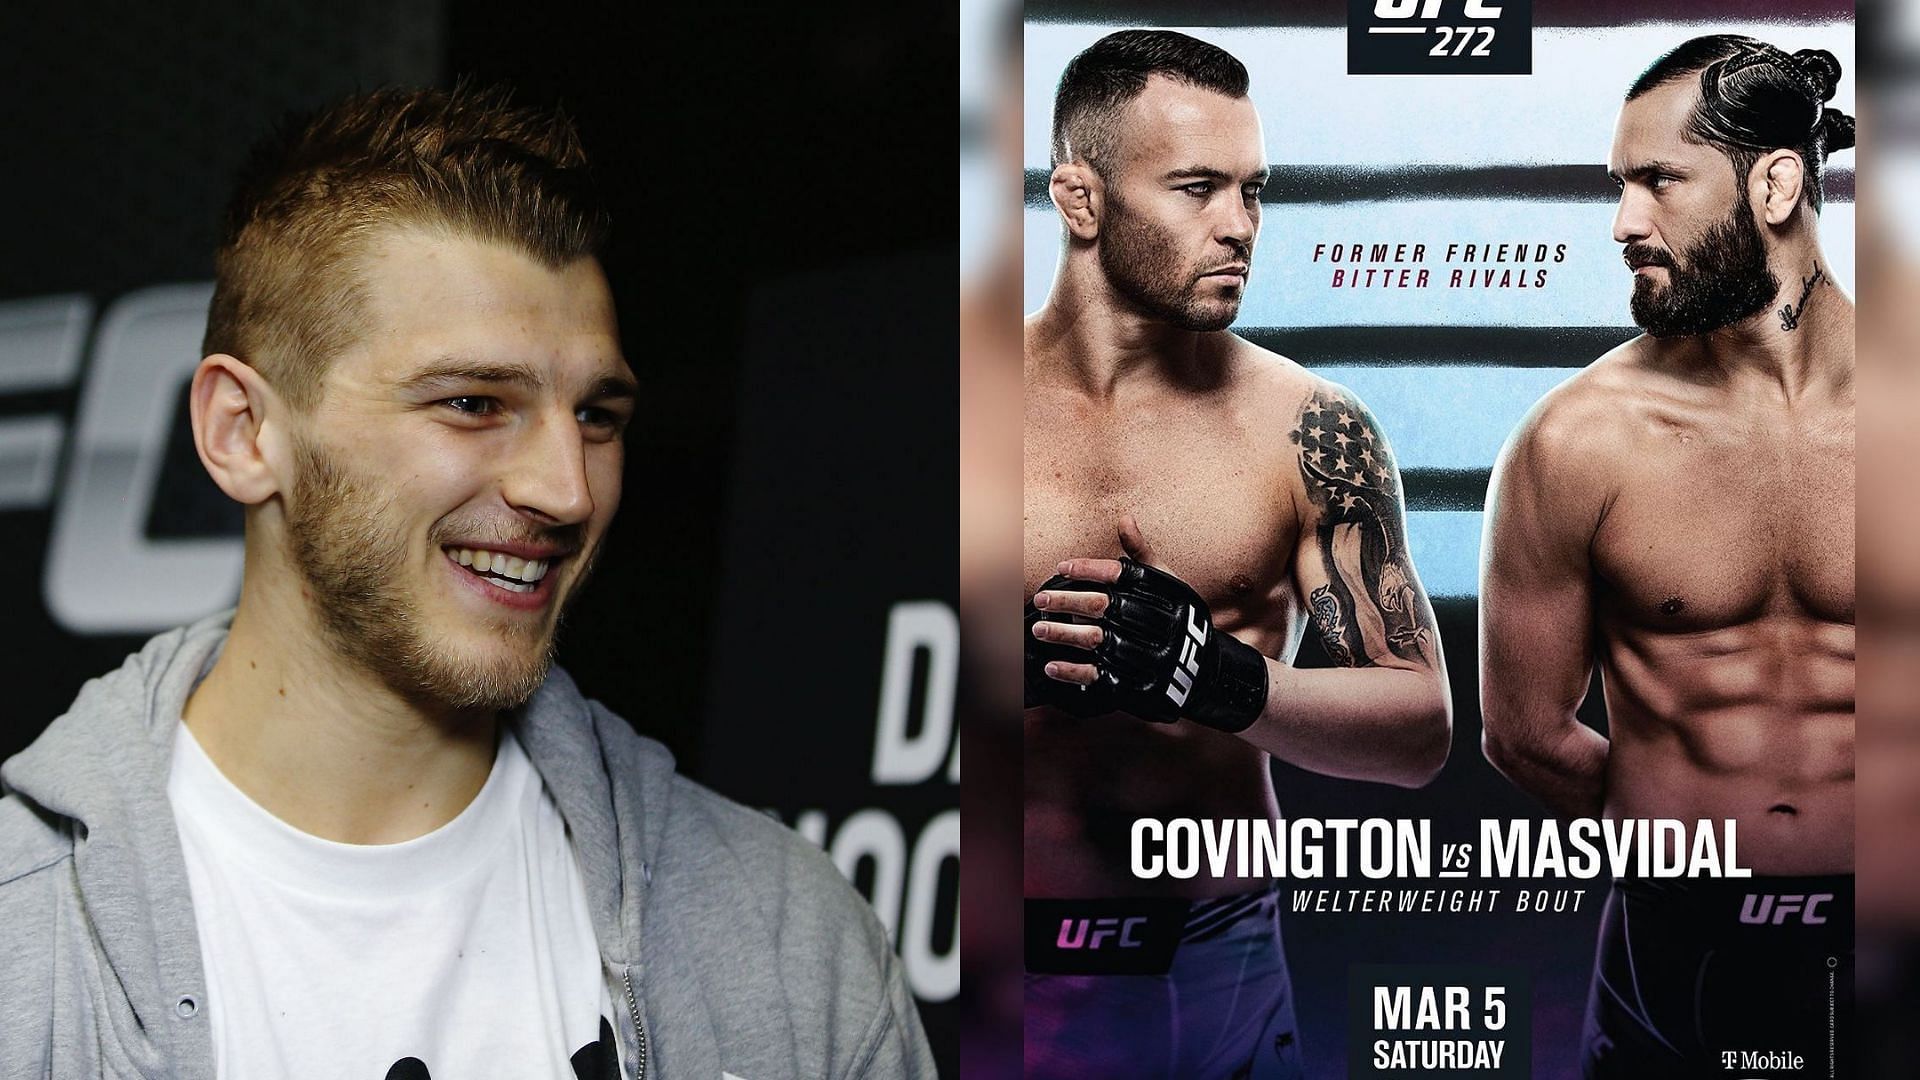 Dan Hooker (Left) and UFC 272 poster (Right) [Images courtesy of Getty and Jorge Masvidal&#039;s Instagram]